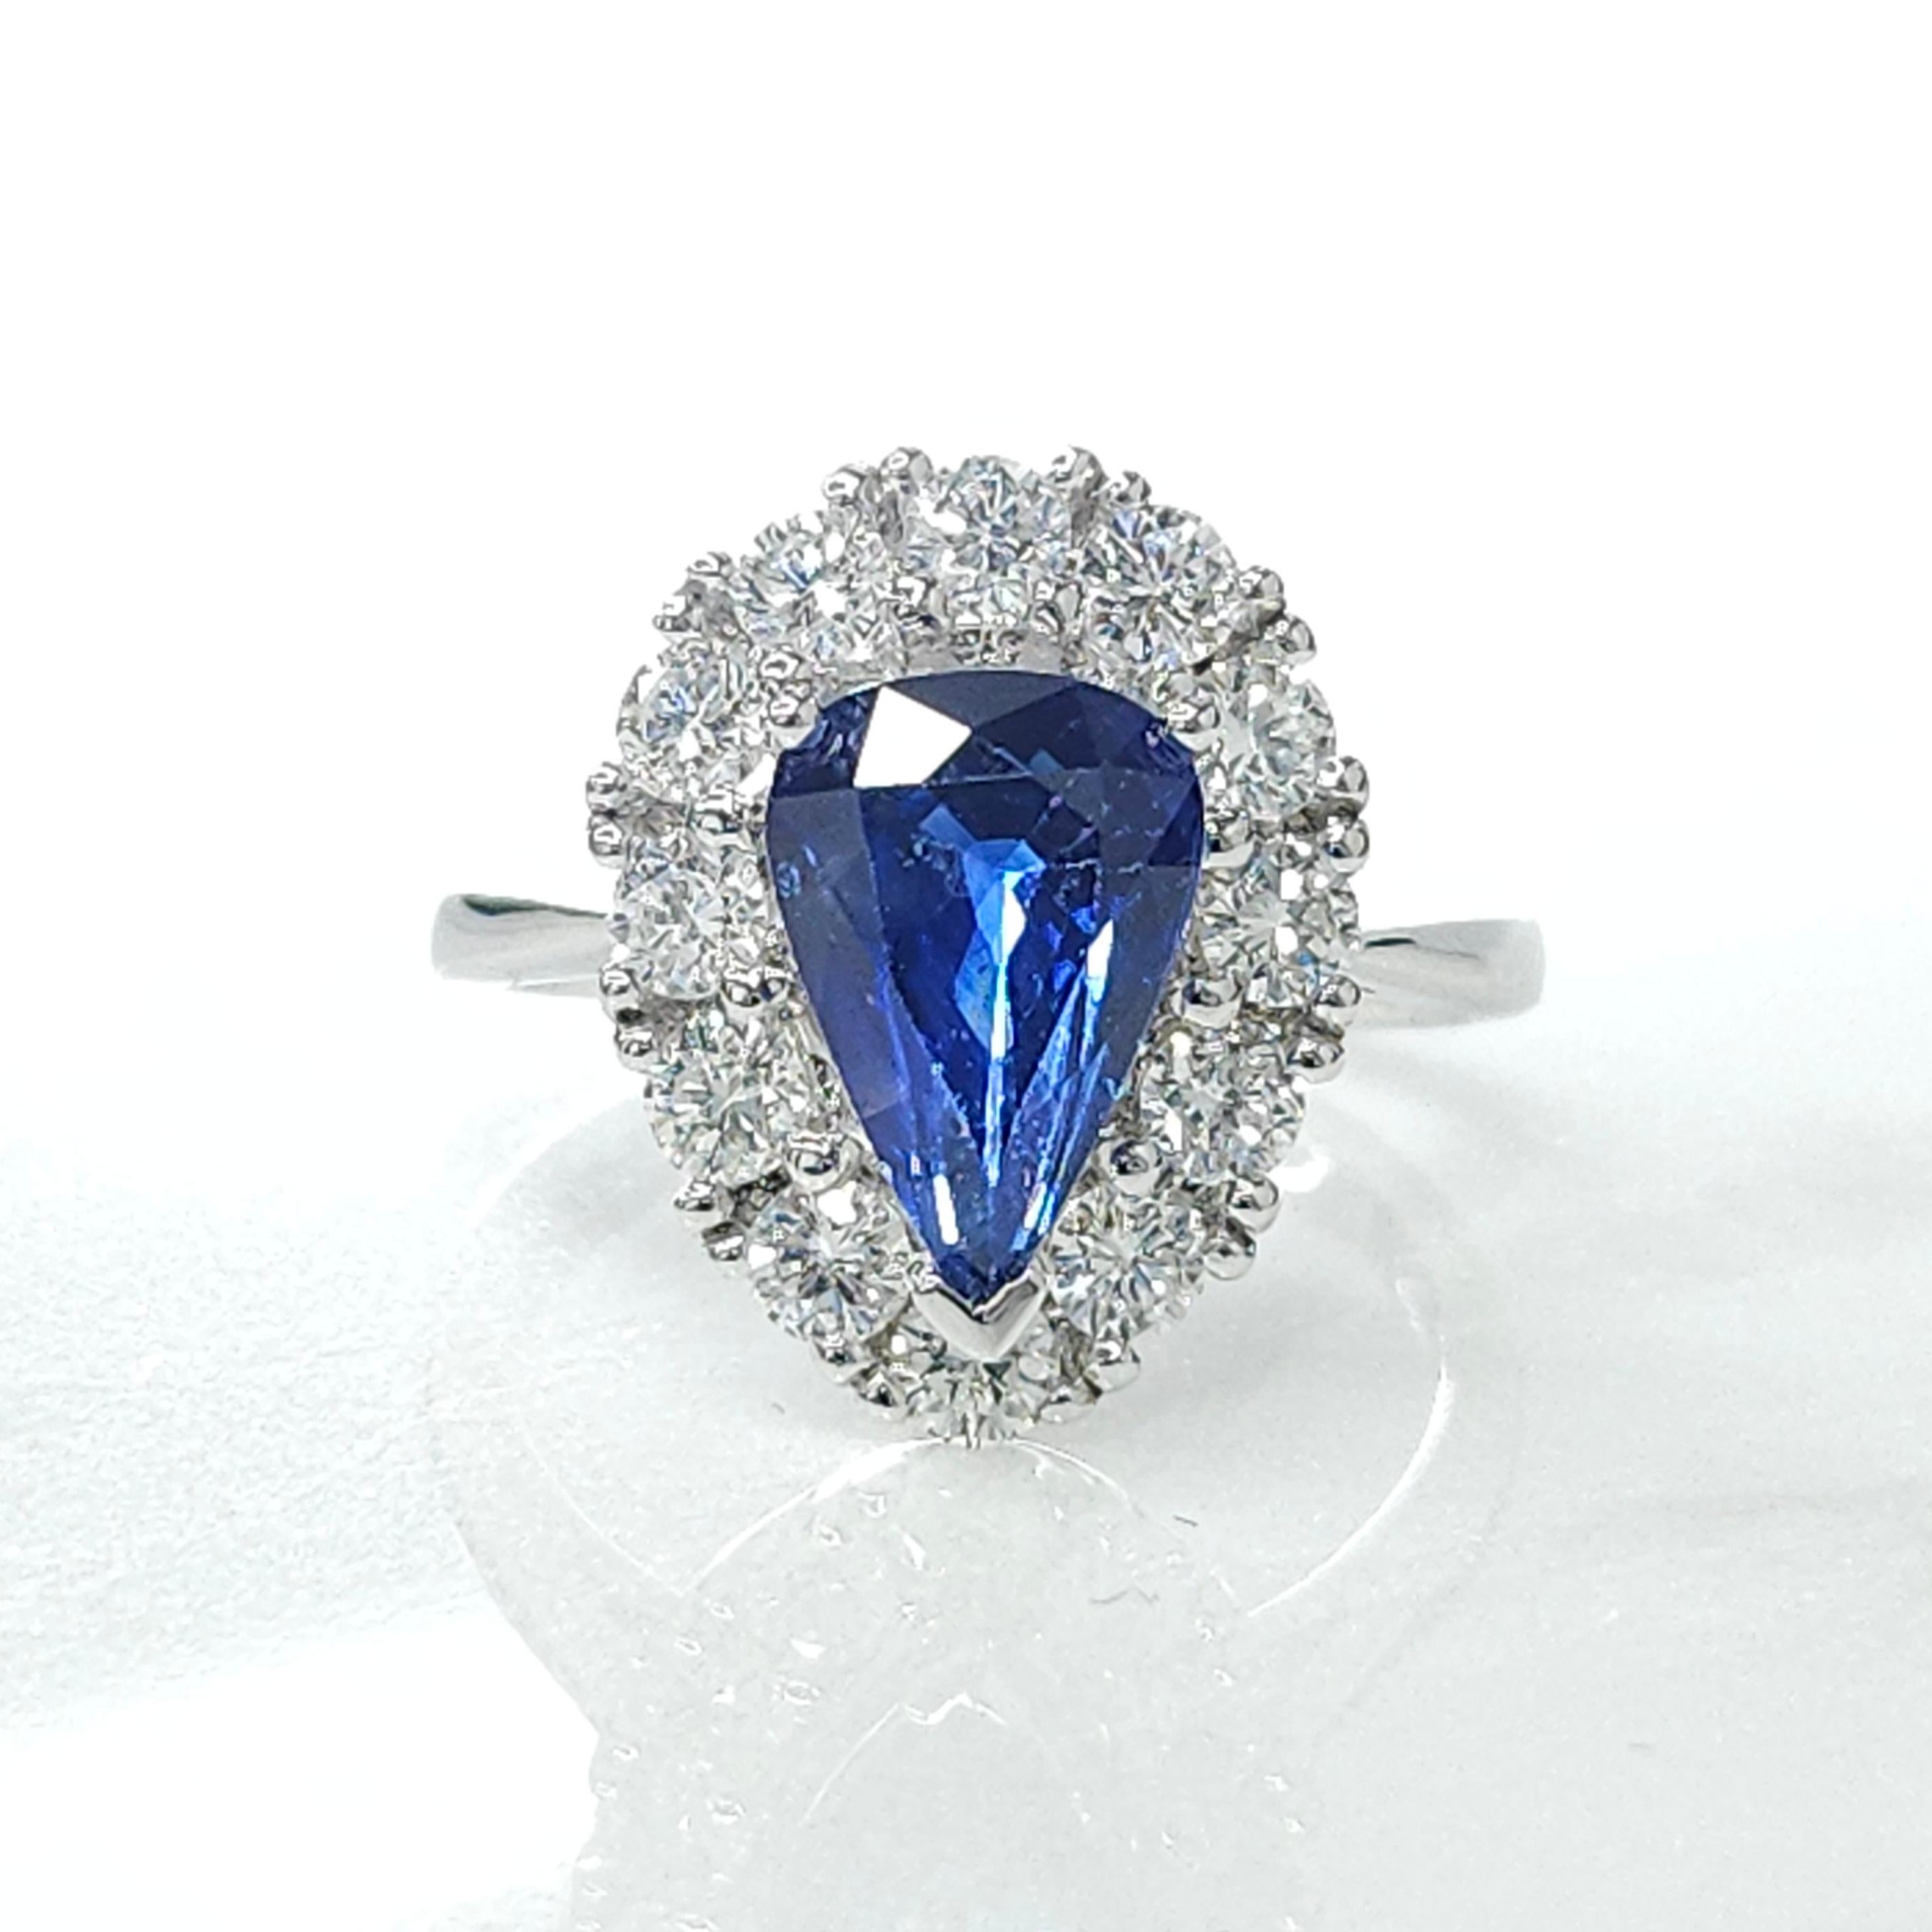 Presenting a stunning piece of jewelry featuring an IGI Certified 3.08 Carat Sapphire in a striking vivid violetish blue color. This captivating gemstone, with an elegant pear shape, takes center stage in a simple style ring crafted from 18K White